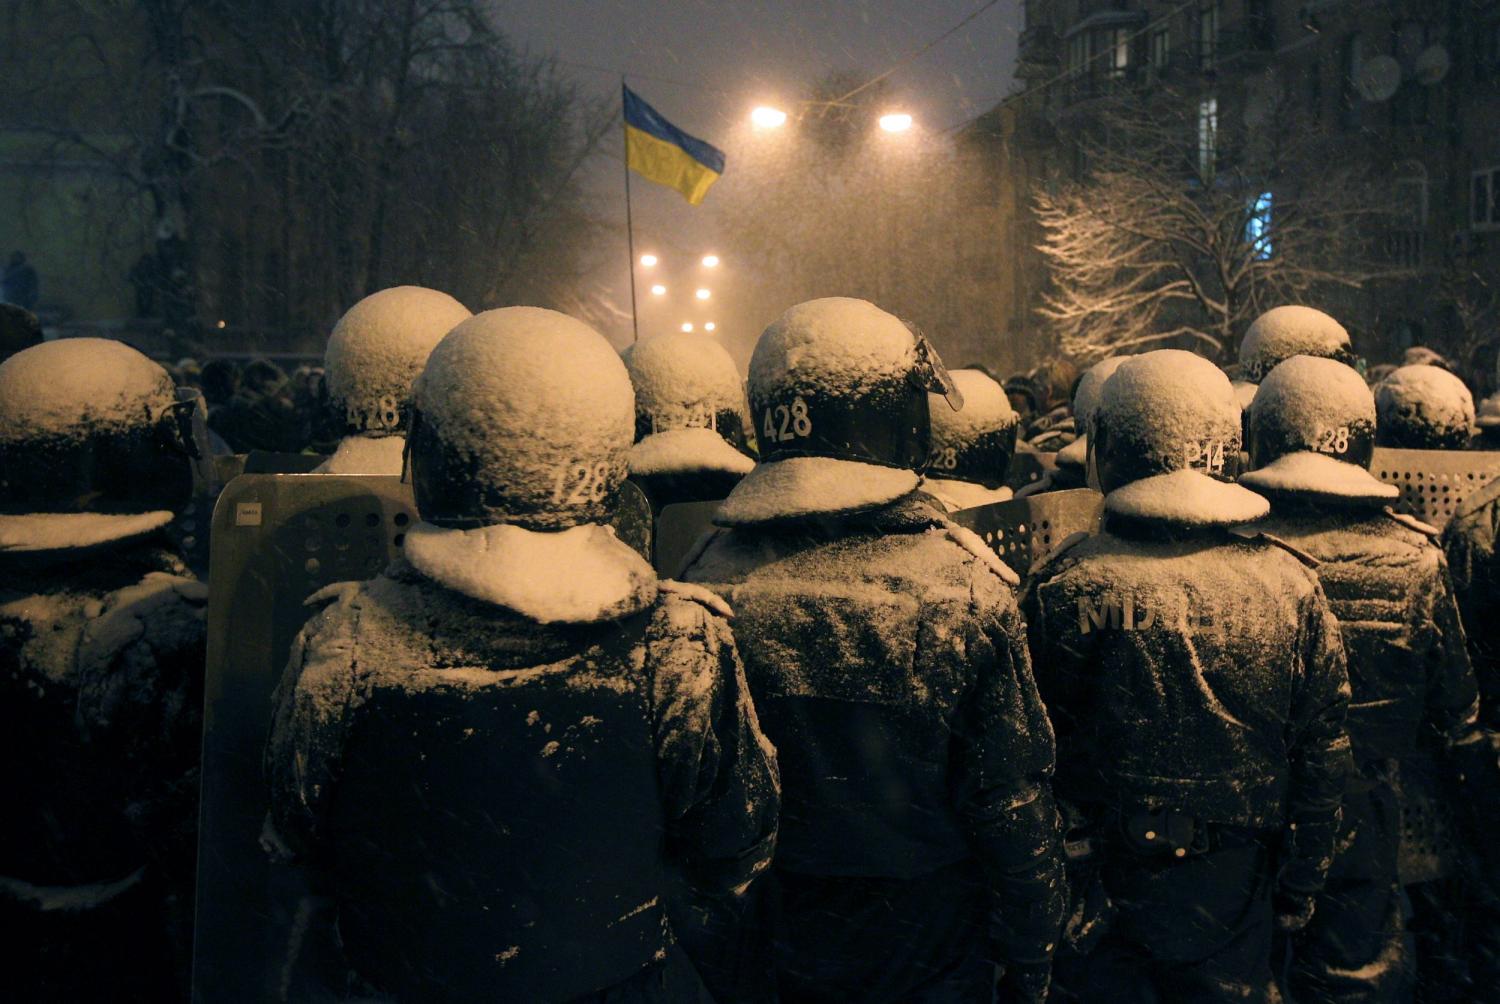 Interior Ministry personnel block a street during a gathering of supporters of EU integration in Kyiv, December 9, 2013.